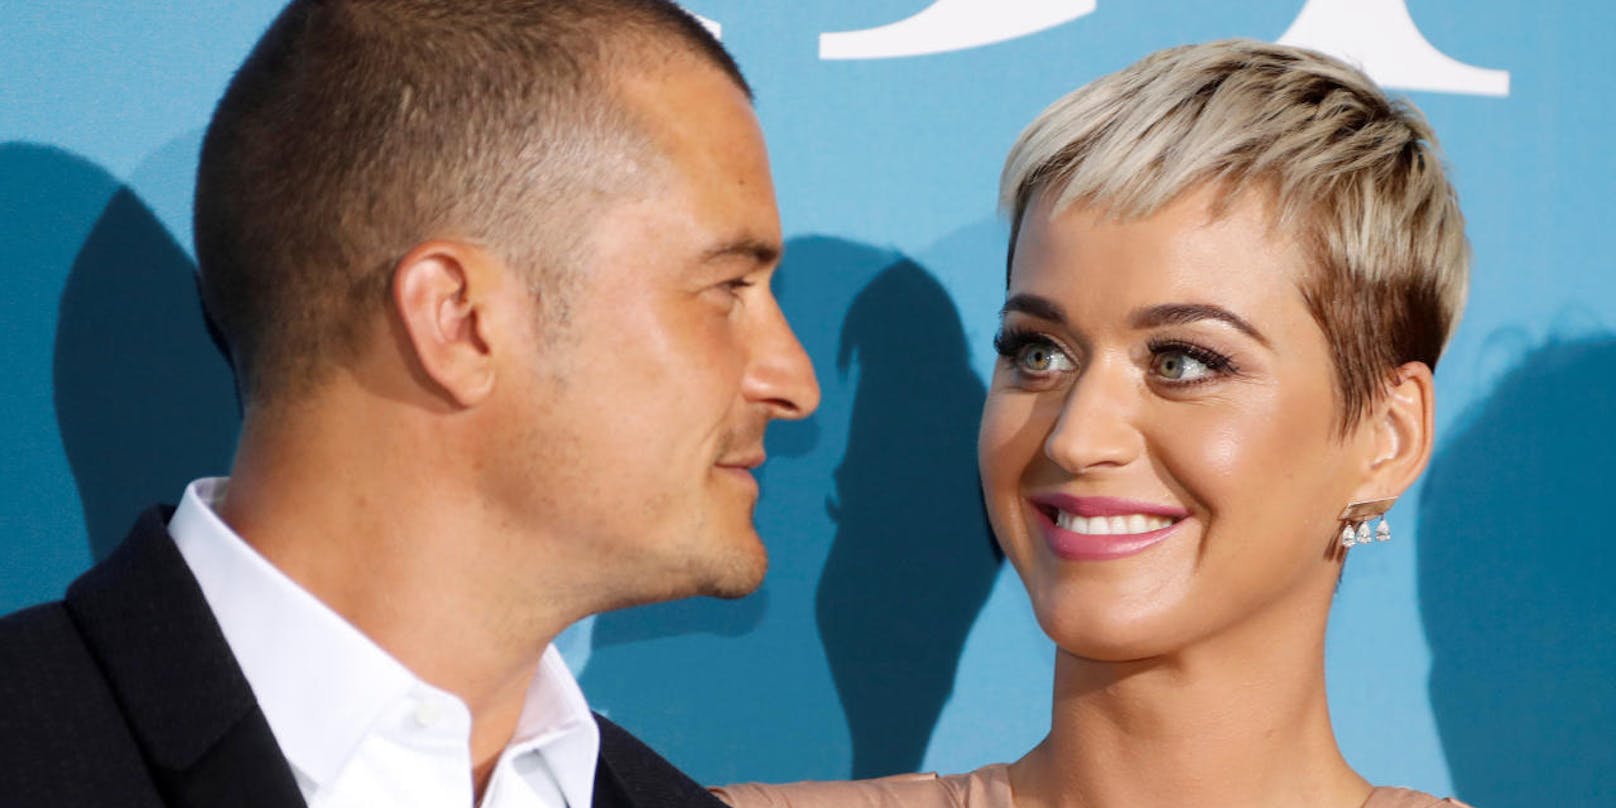 Seit 2016 sind <strong>Katy Perry</strong> und <strong>Orlando Bloom</strong> ein Paar